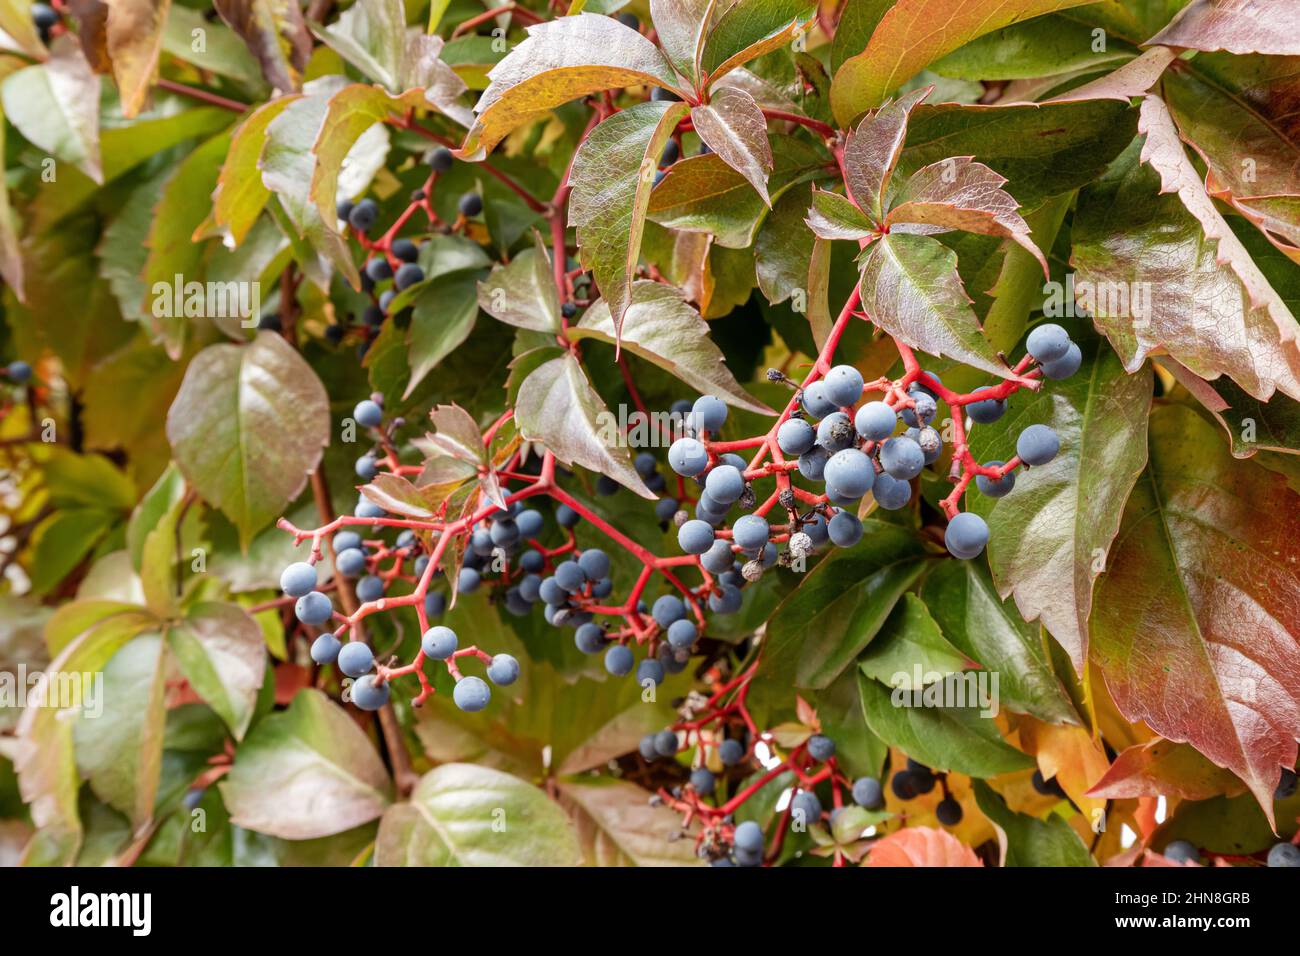 Parthenocissus is a climbing tendril in the grape family. Fruits and foliage at autumn time Stock Photo